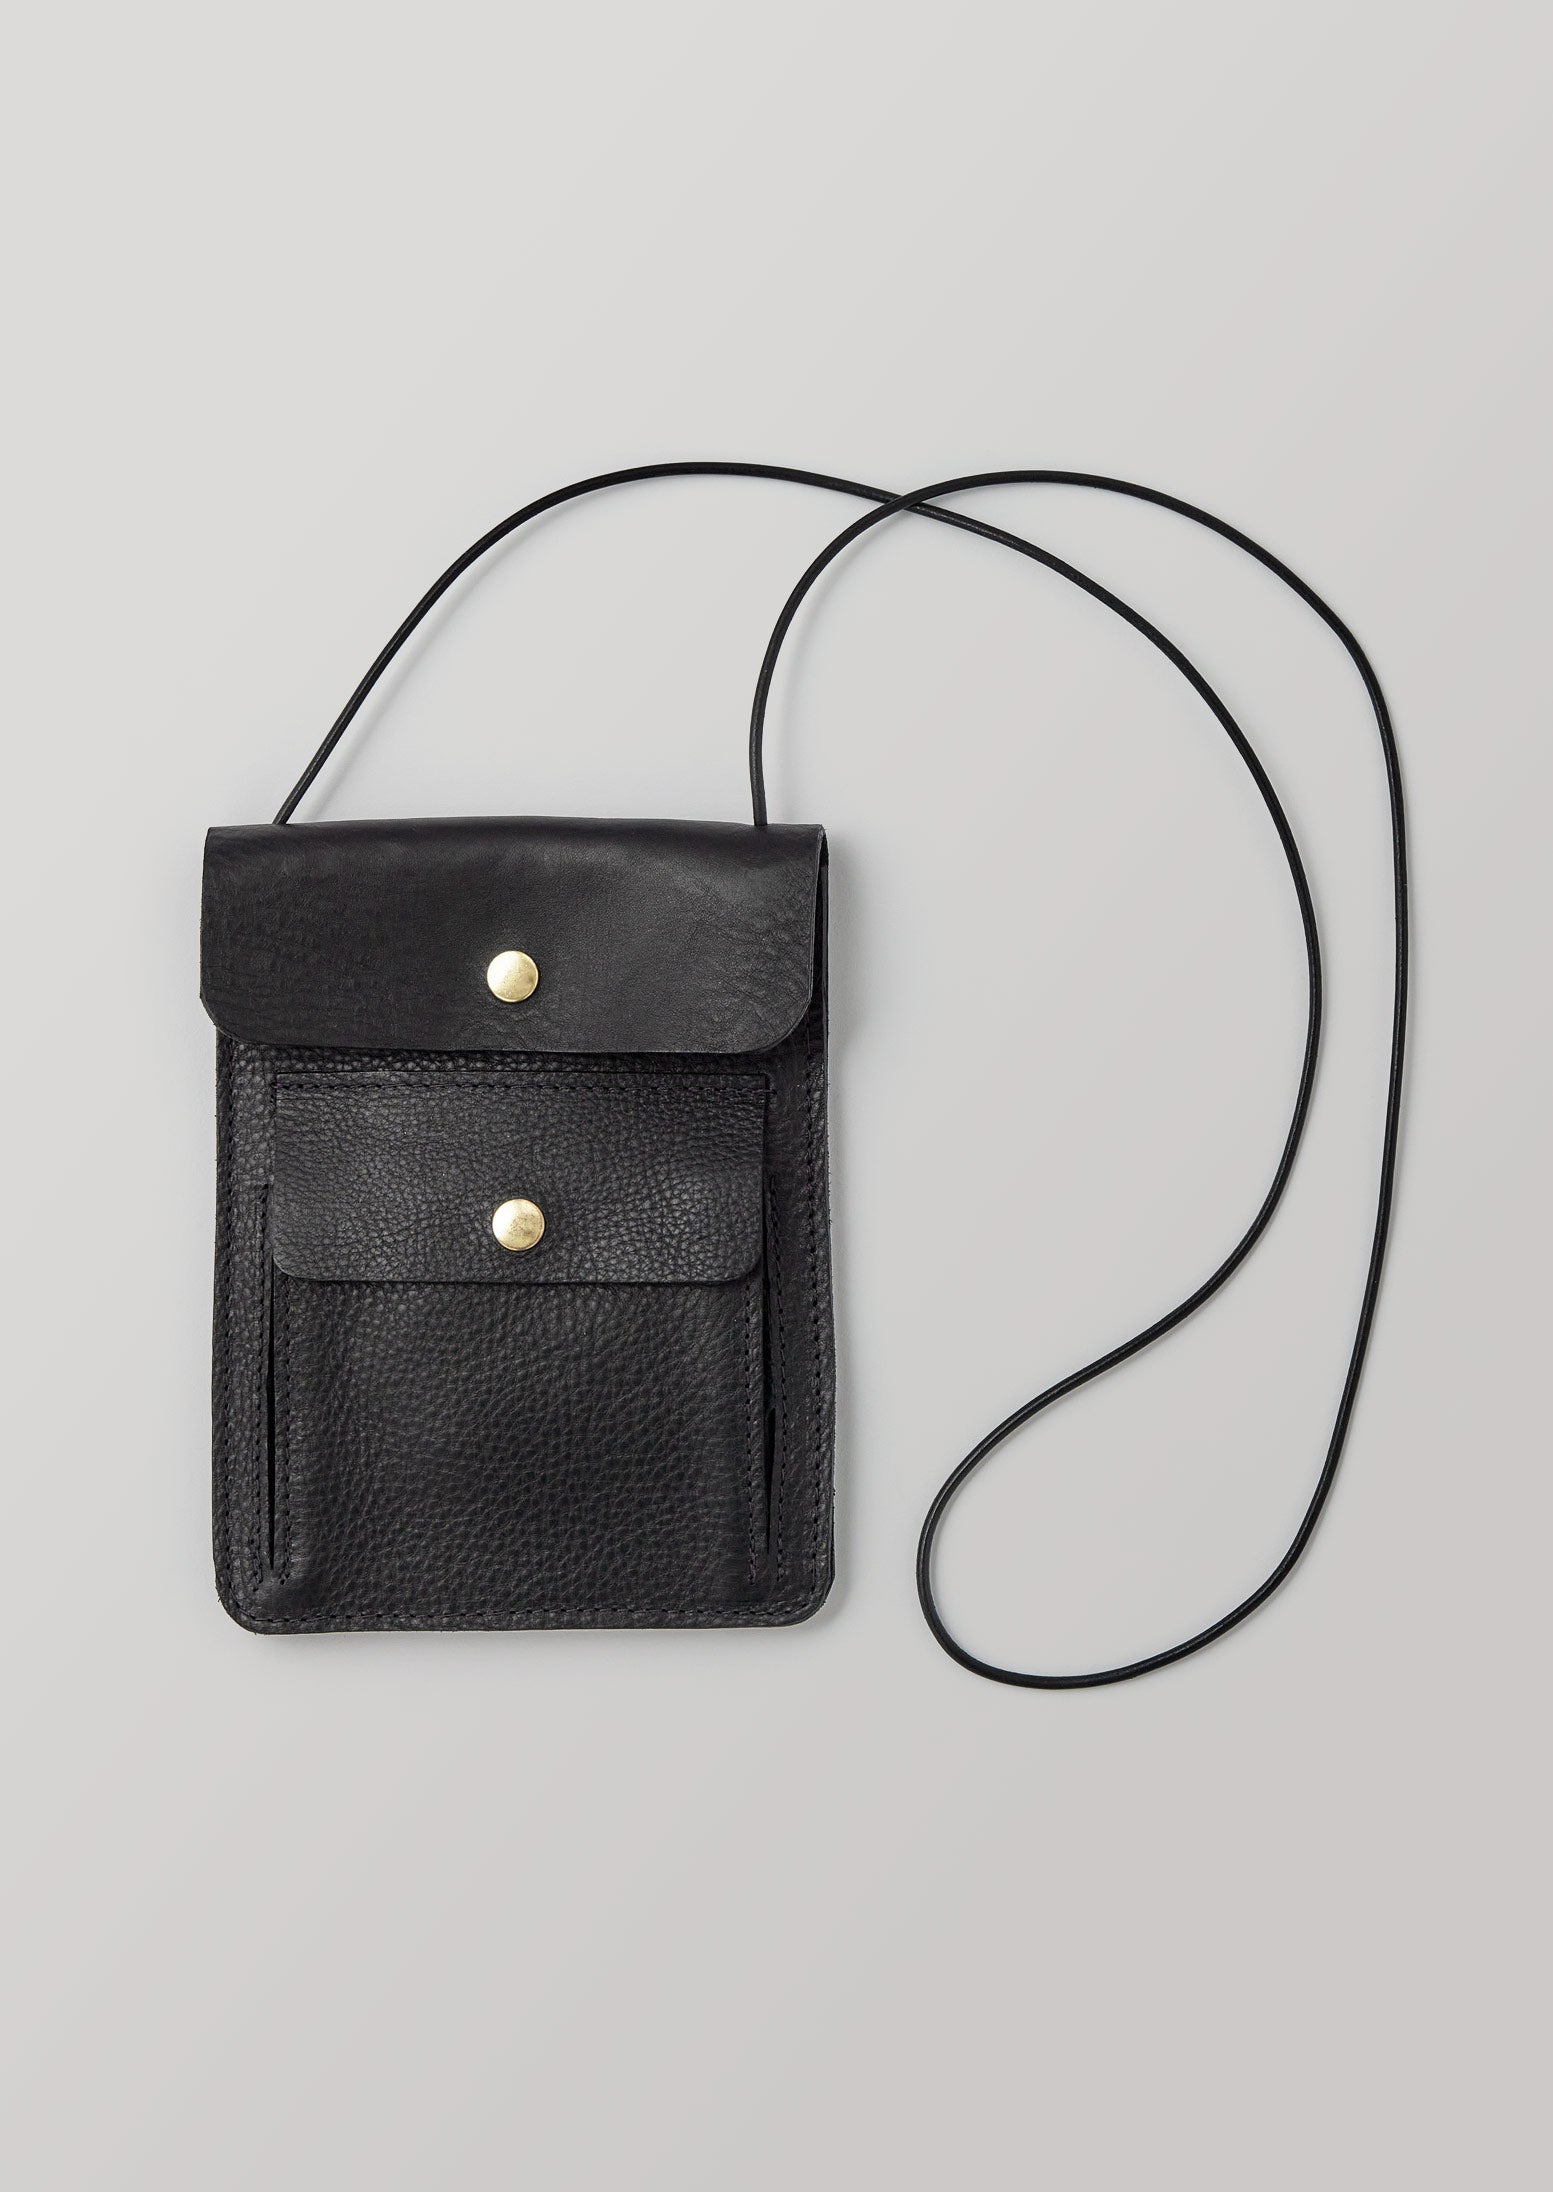 Luxe Curator Handbags SALE! - The Scout Guide